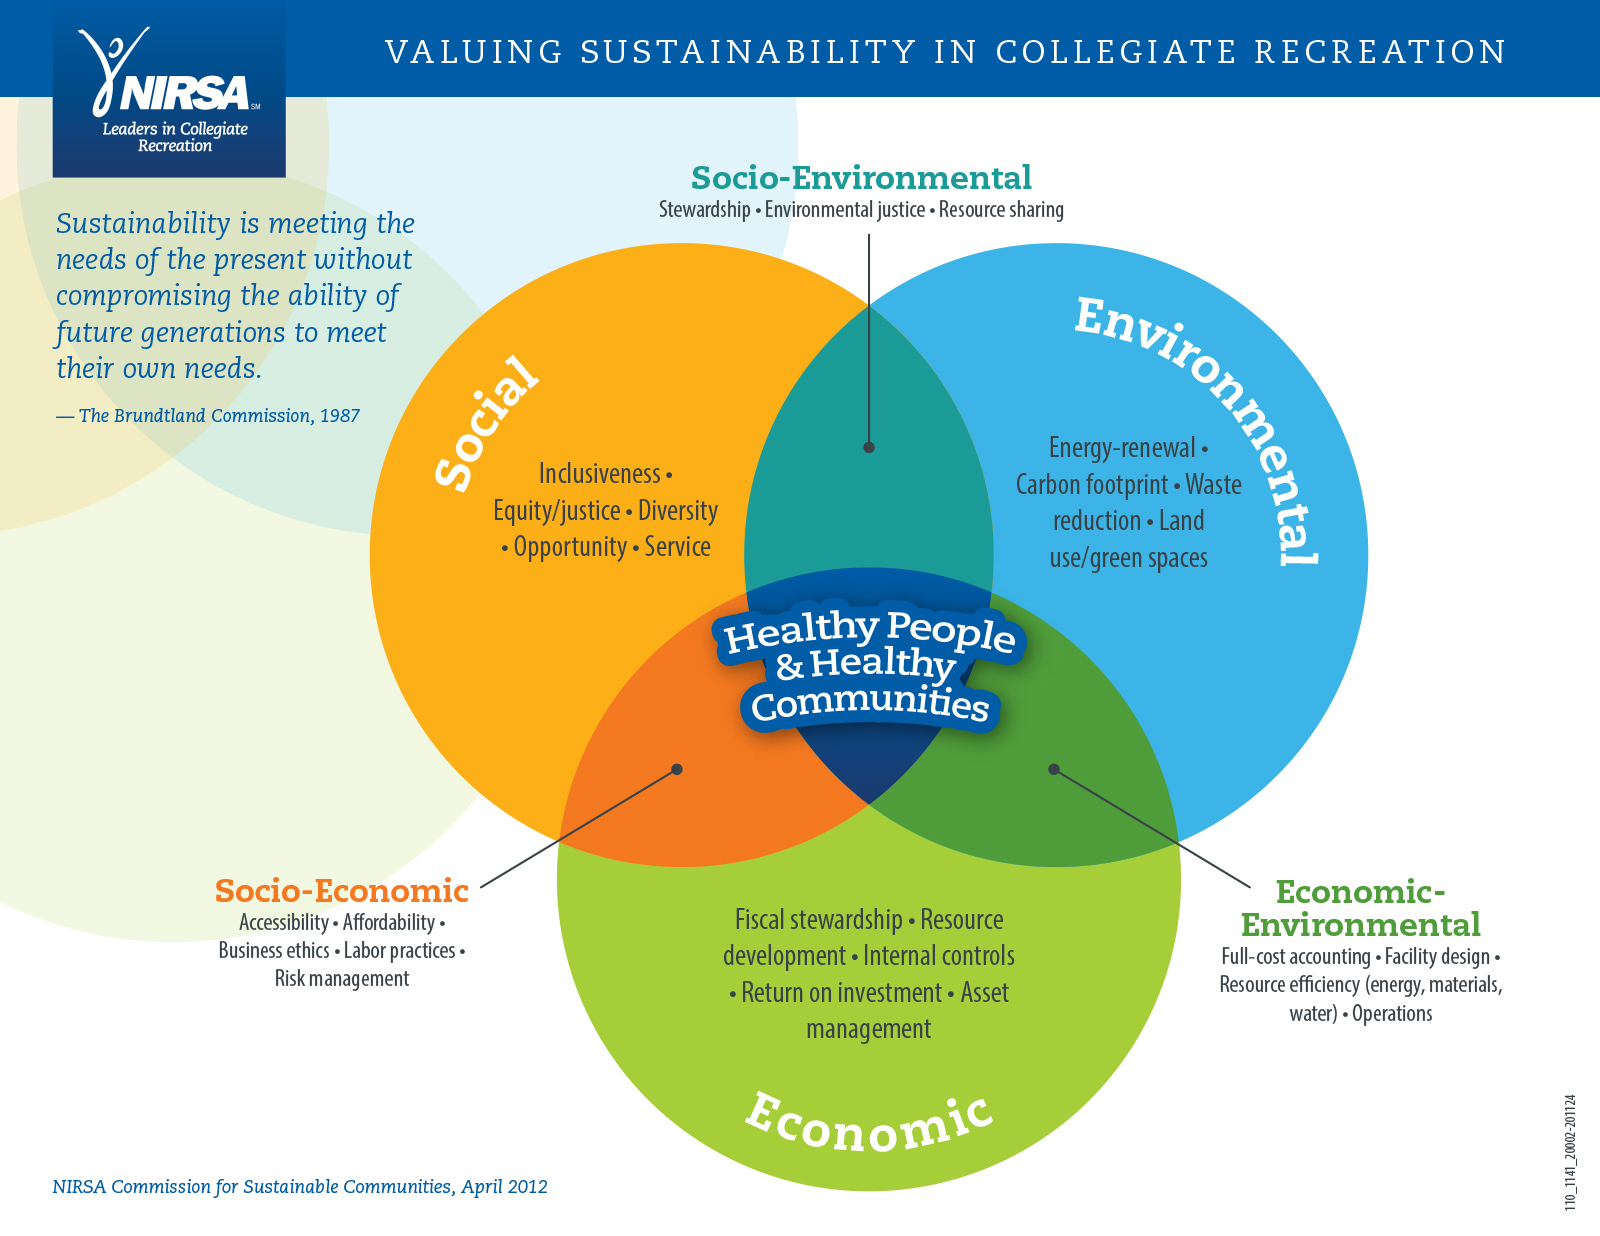 The image is an illustration of a three circle venn diagram explaining different types of sustainability.